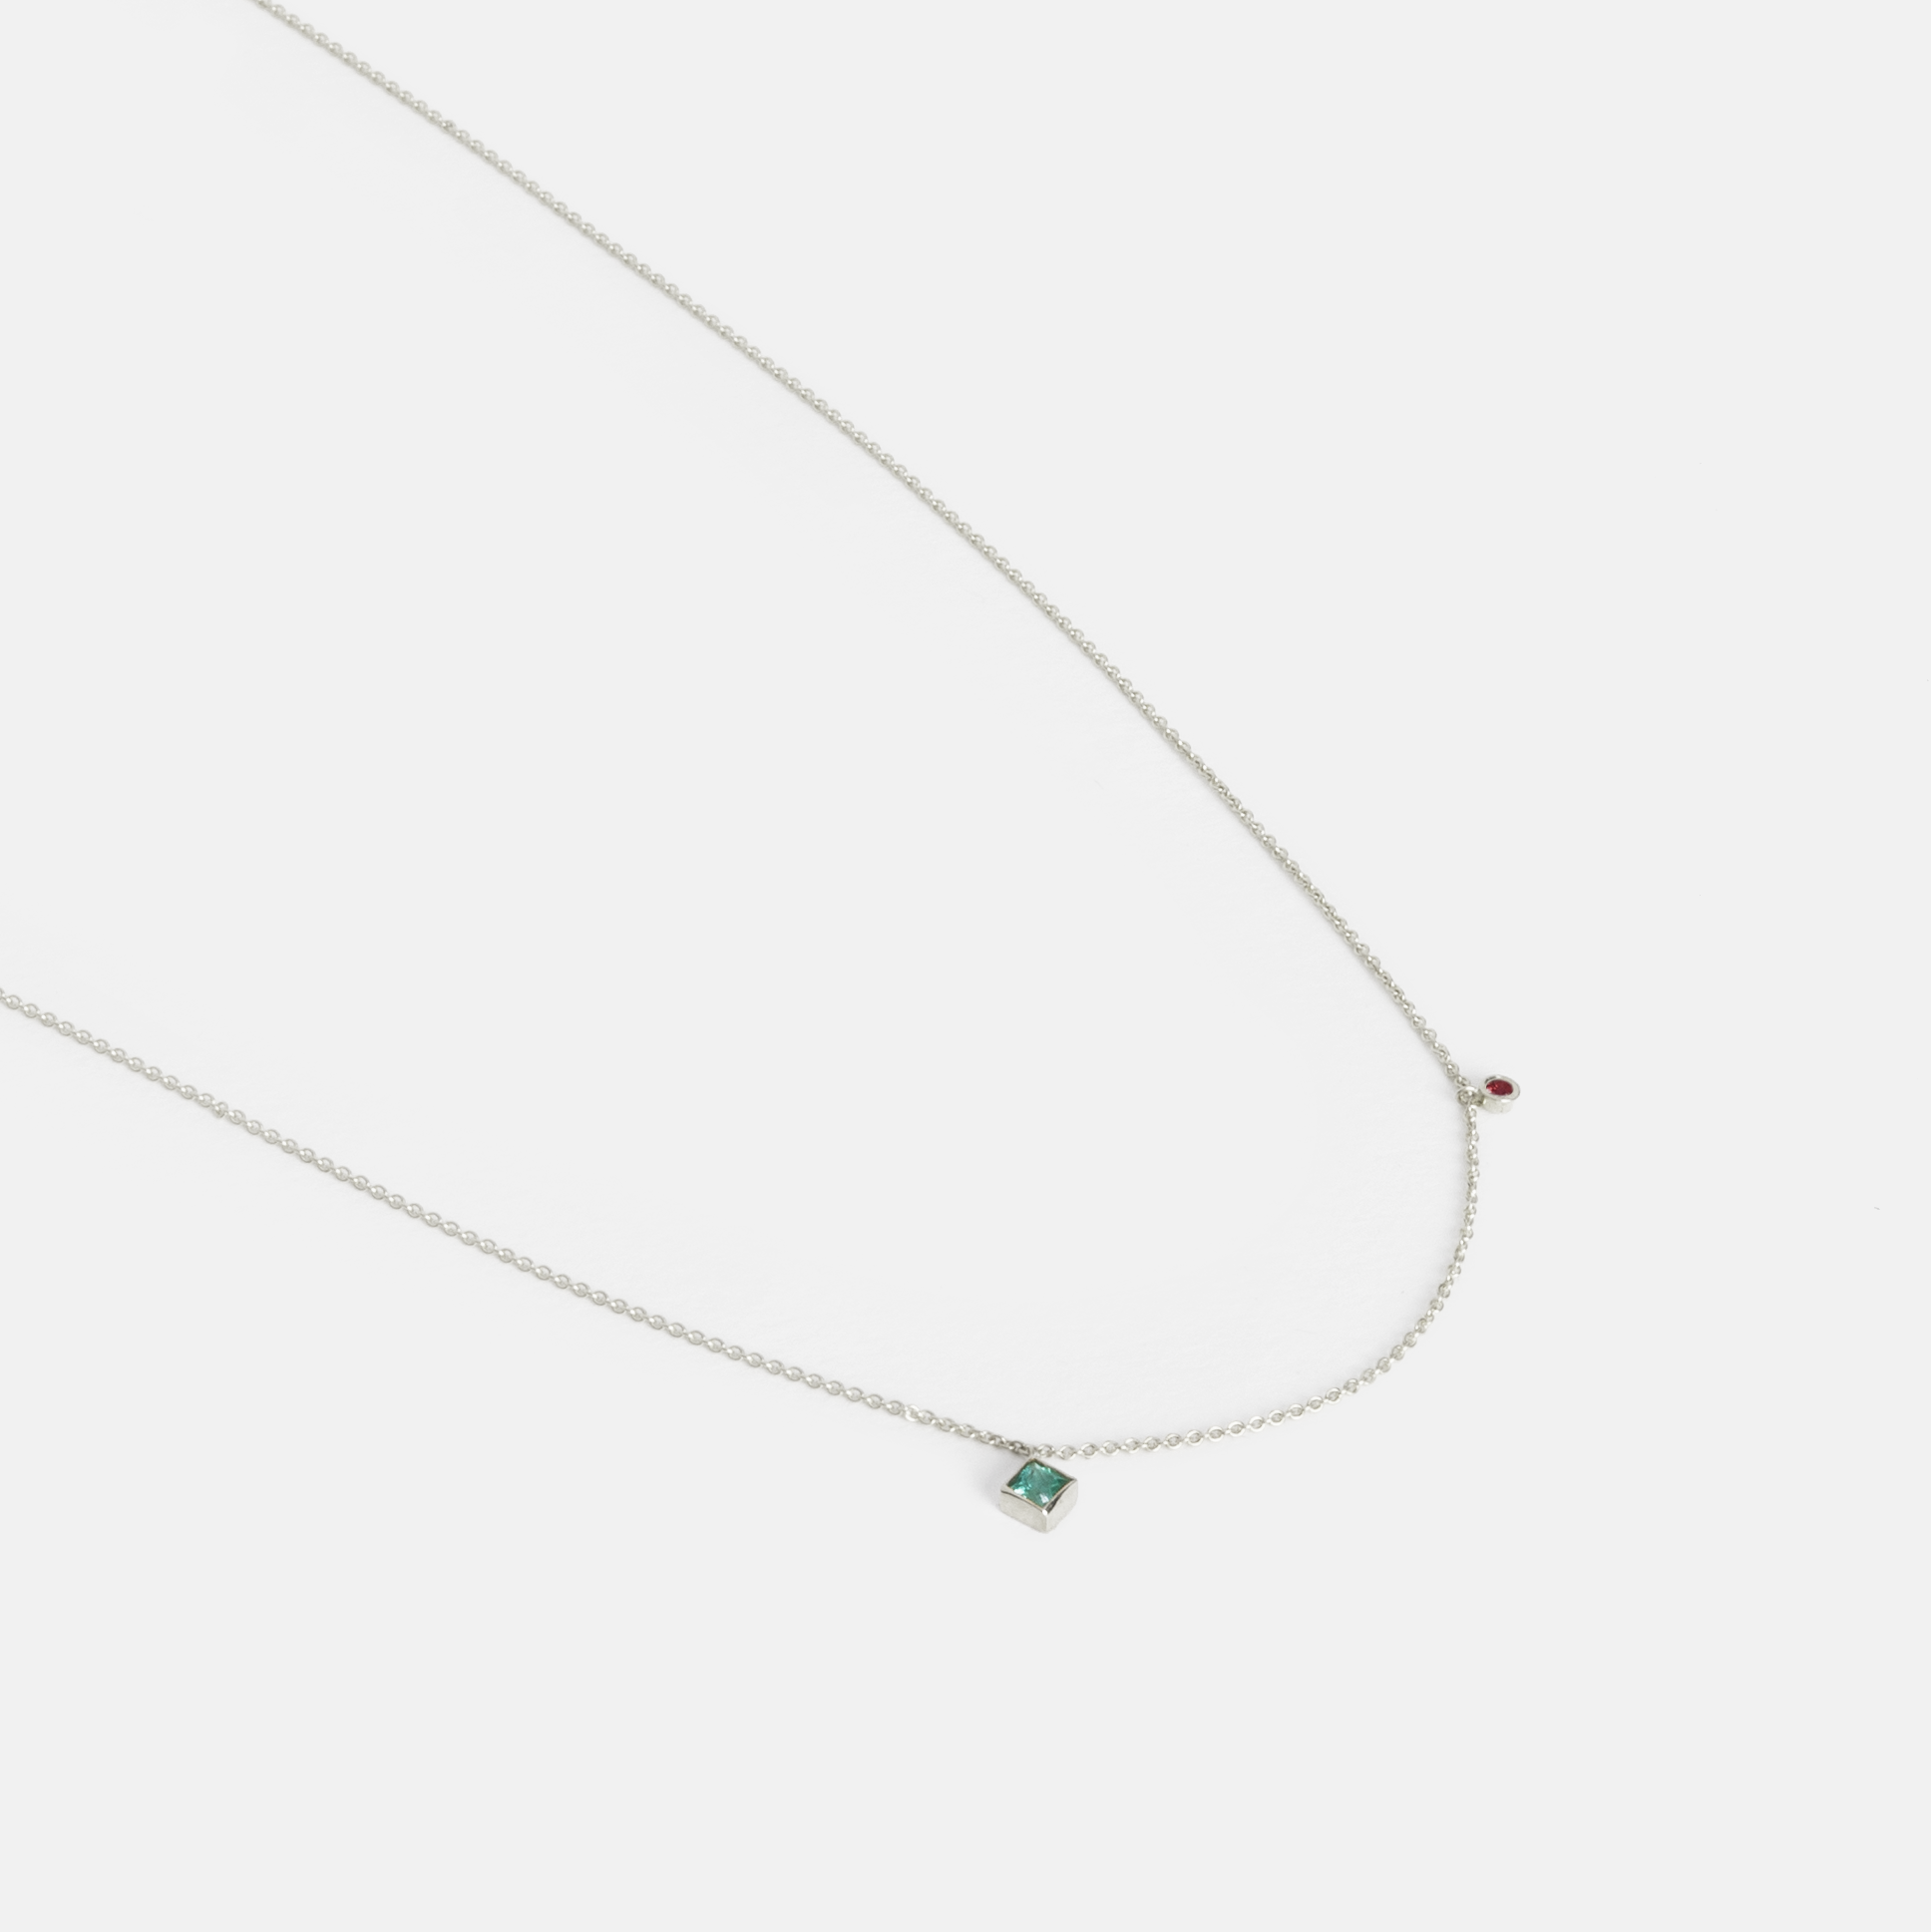  Ibi Thin Necklace in 14k White Gold set with Emerald and Ruby By SHW Fine Jewelry NYC